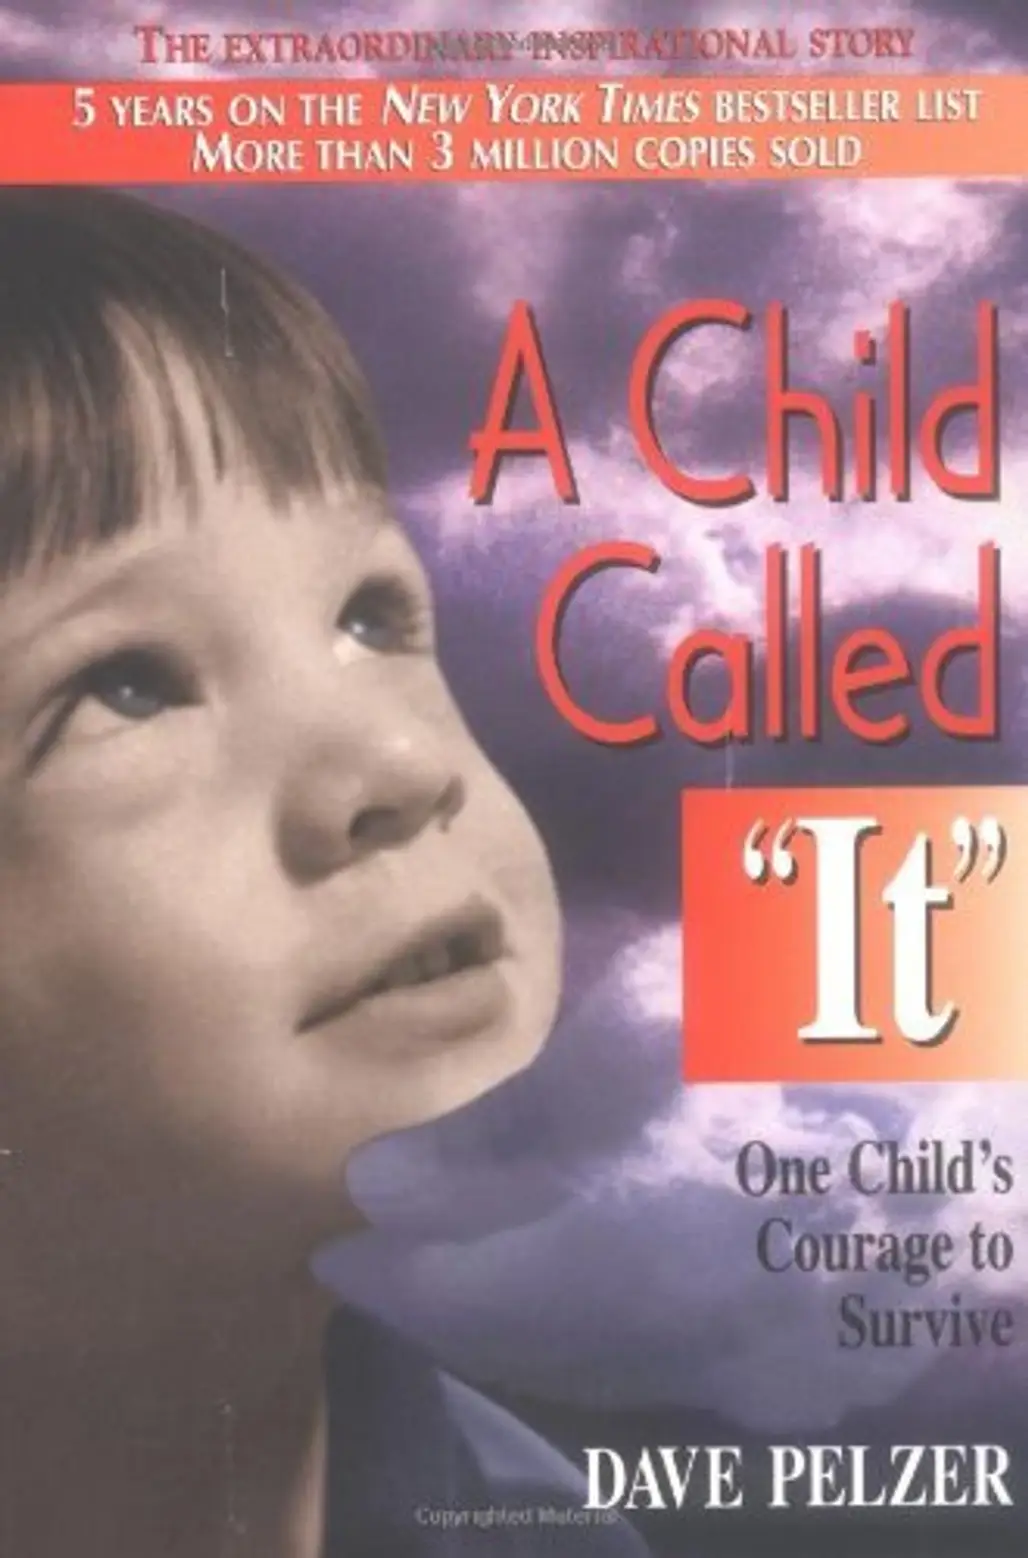 A Child Called It by David Pelzer